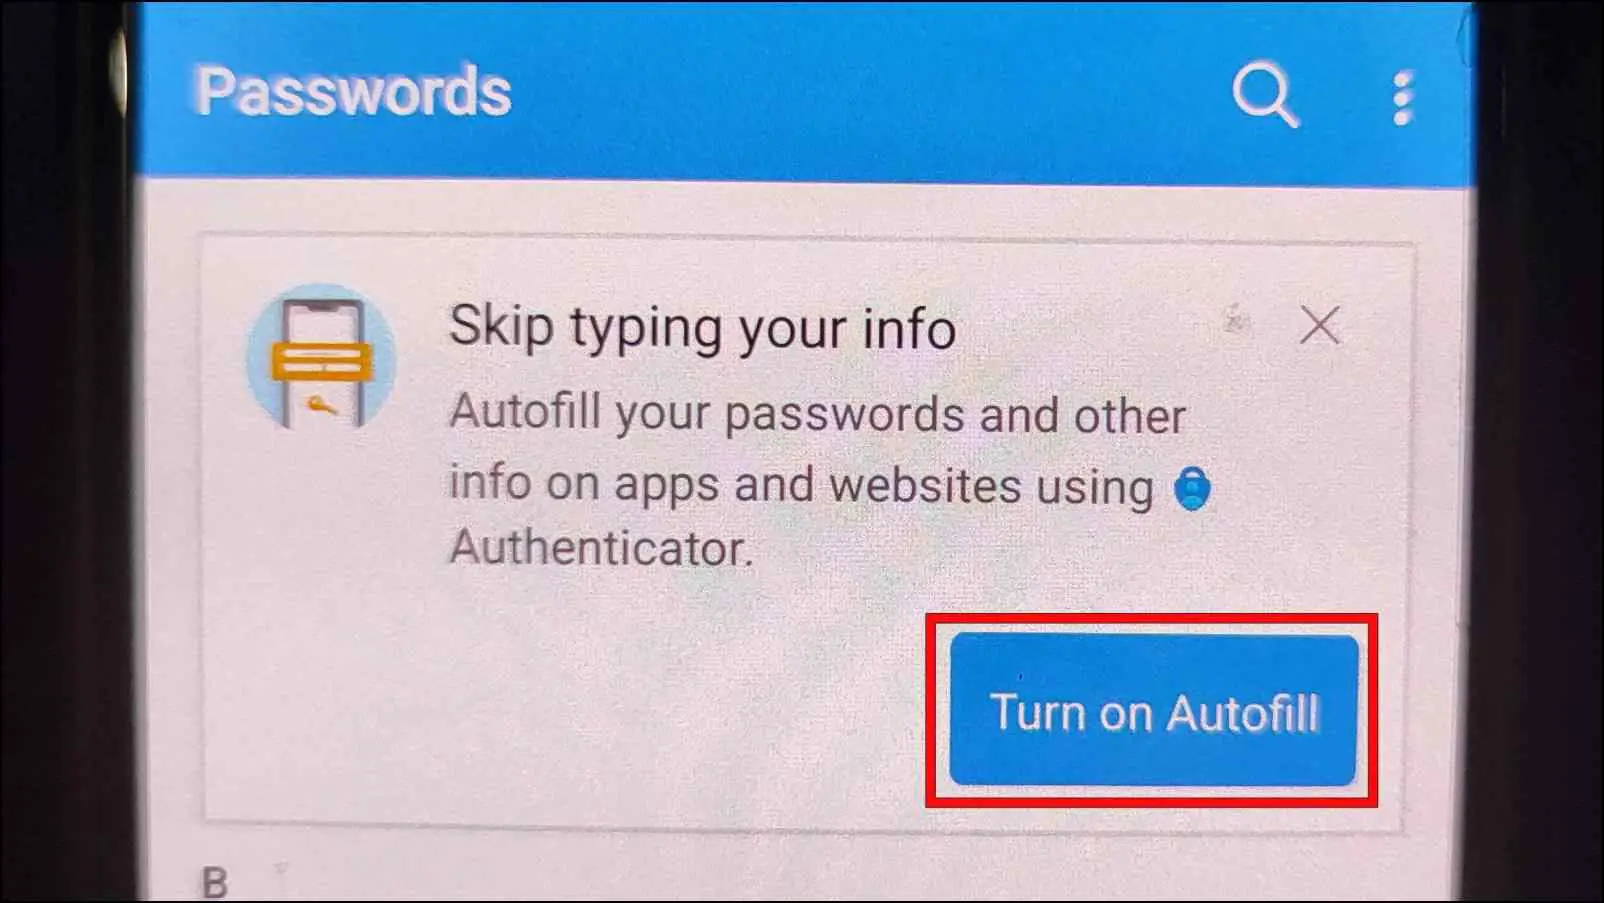 Enable the Autofill Service by Clicking on Turn On Autofill